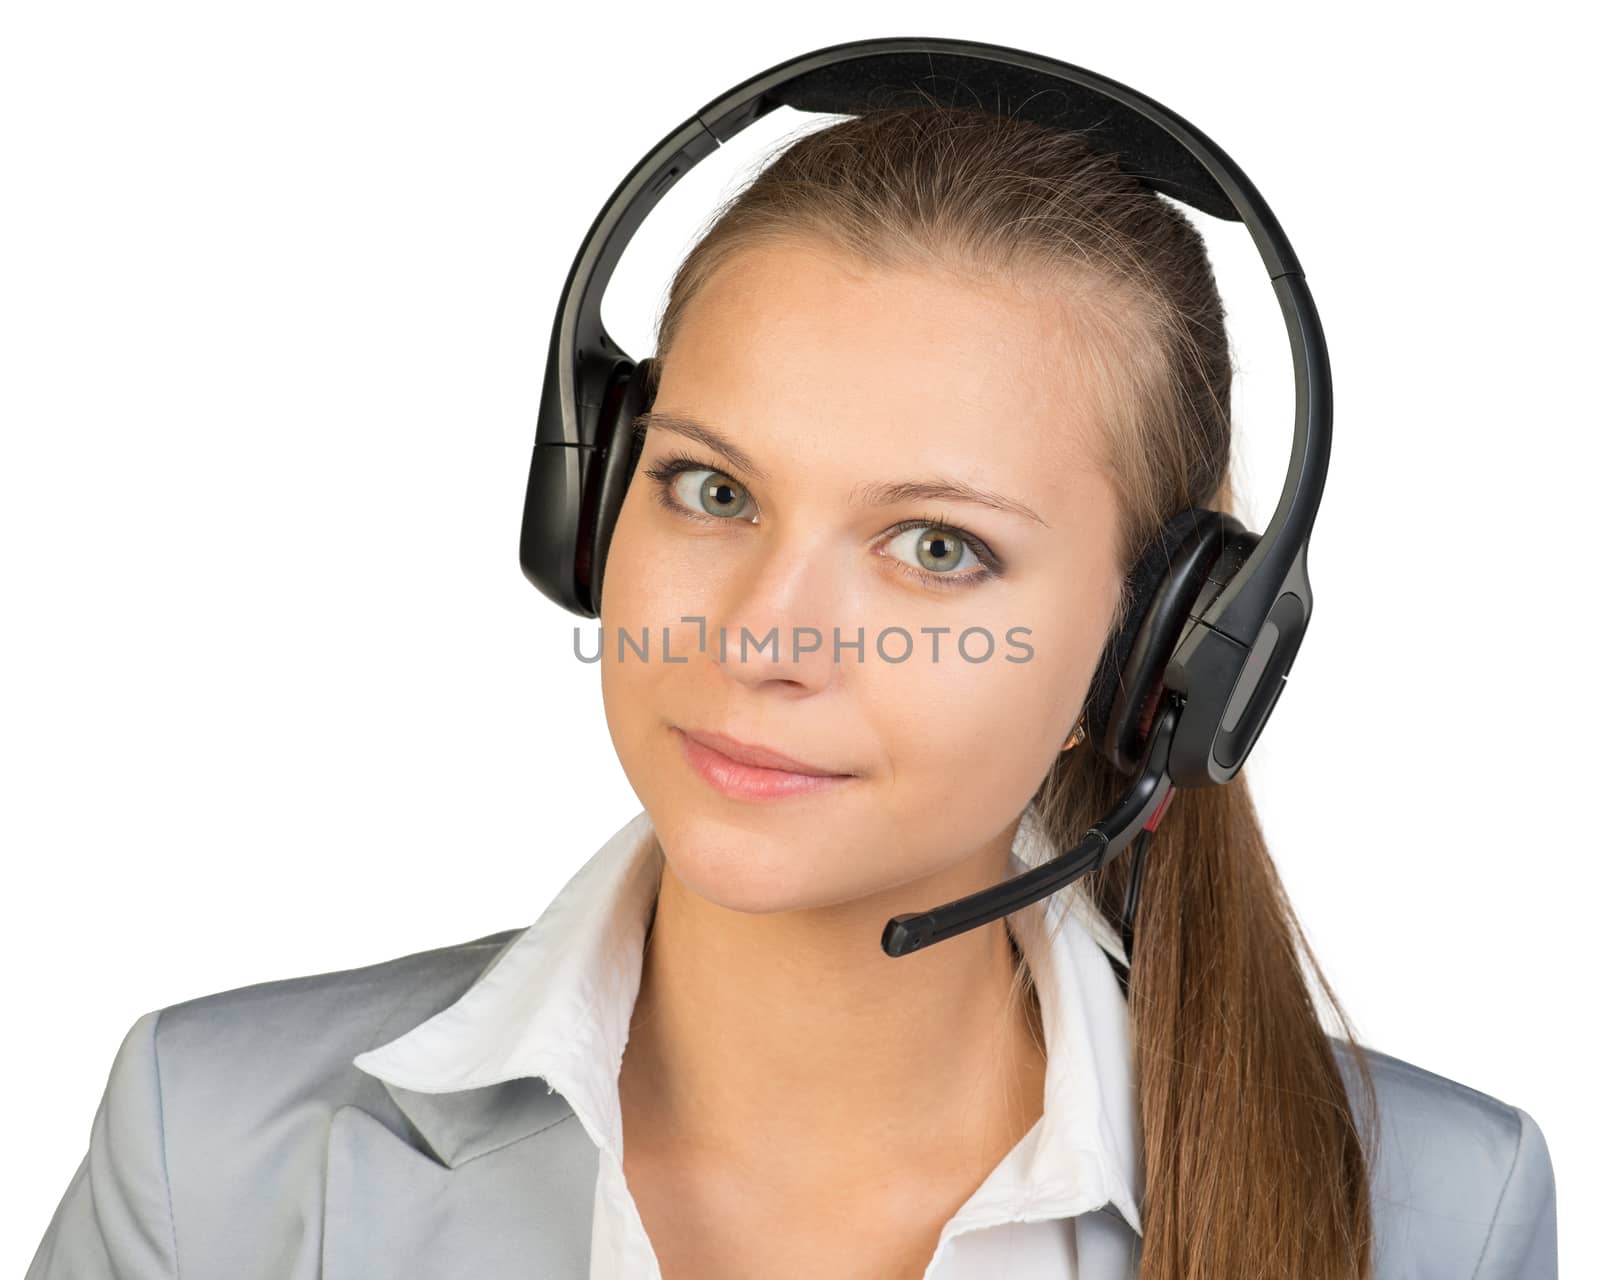 Businesswoman in headset, her head tilted slightly to the side, looking at camera. Isolated over white background